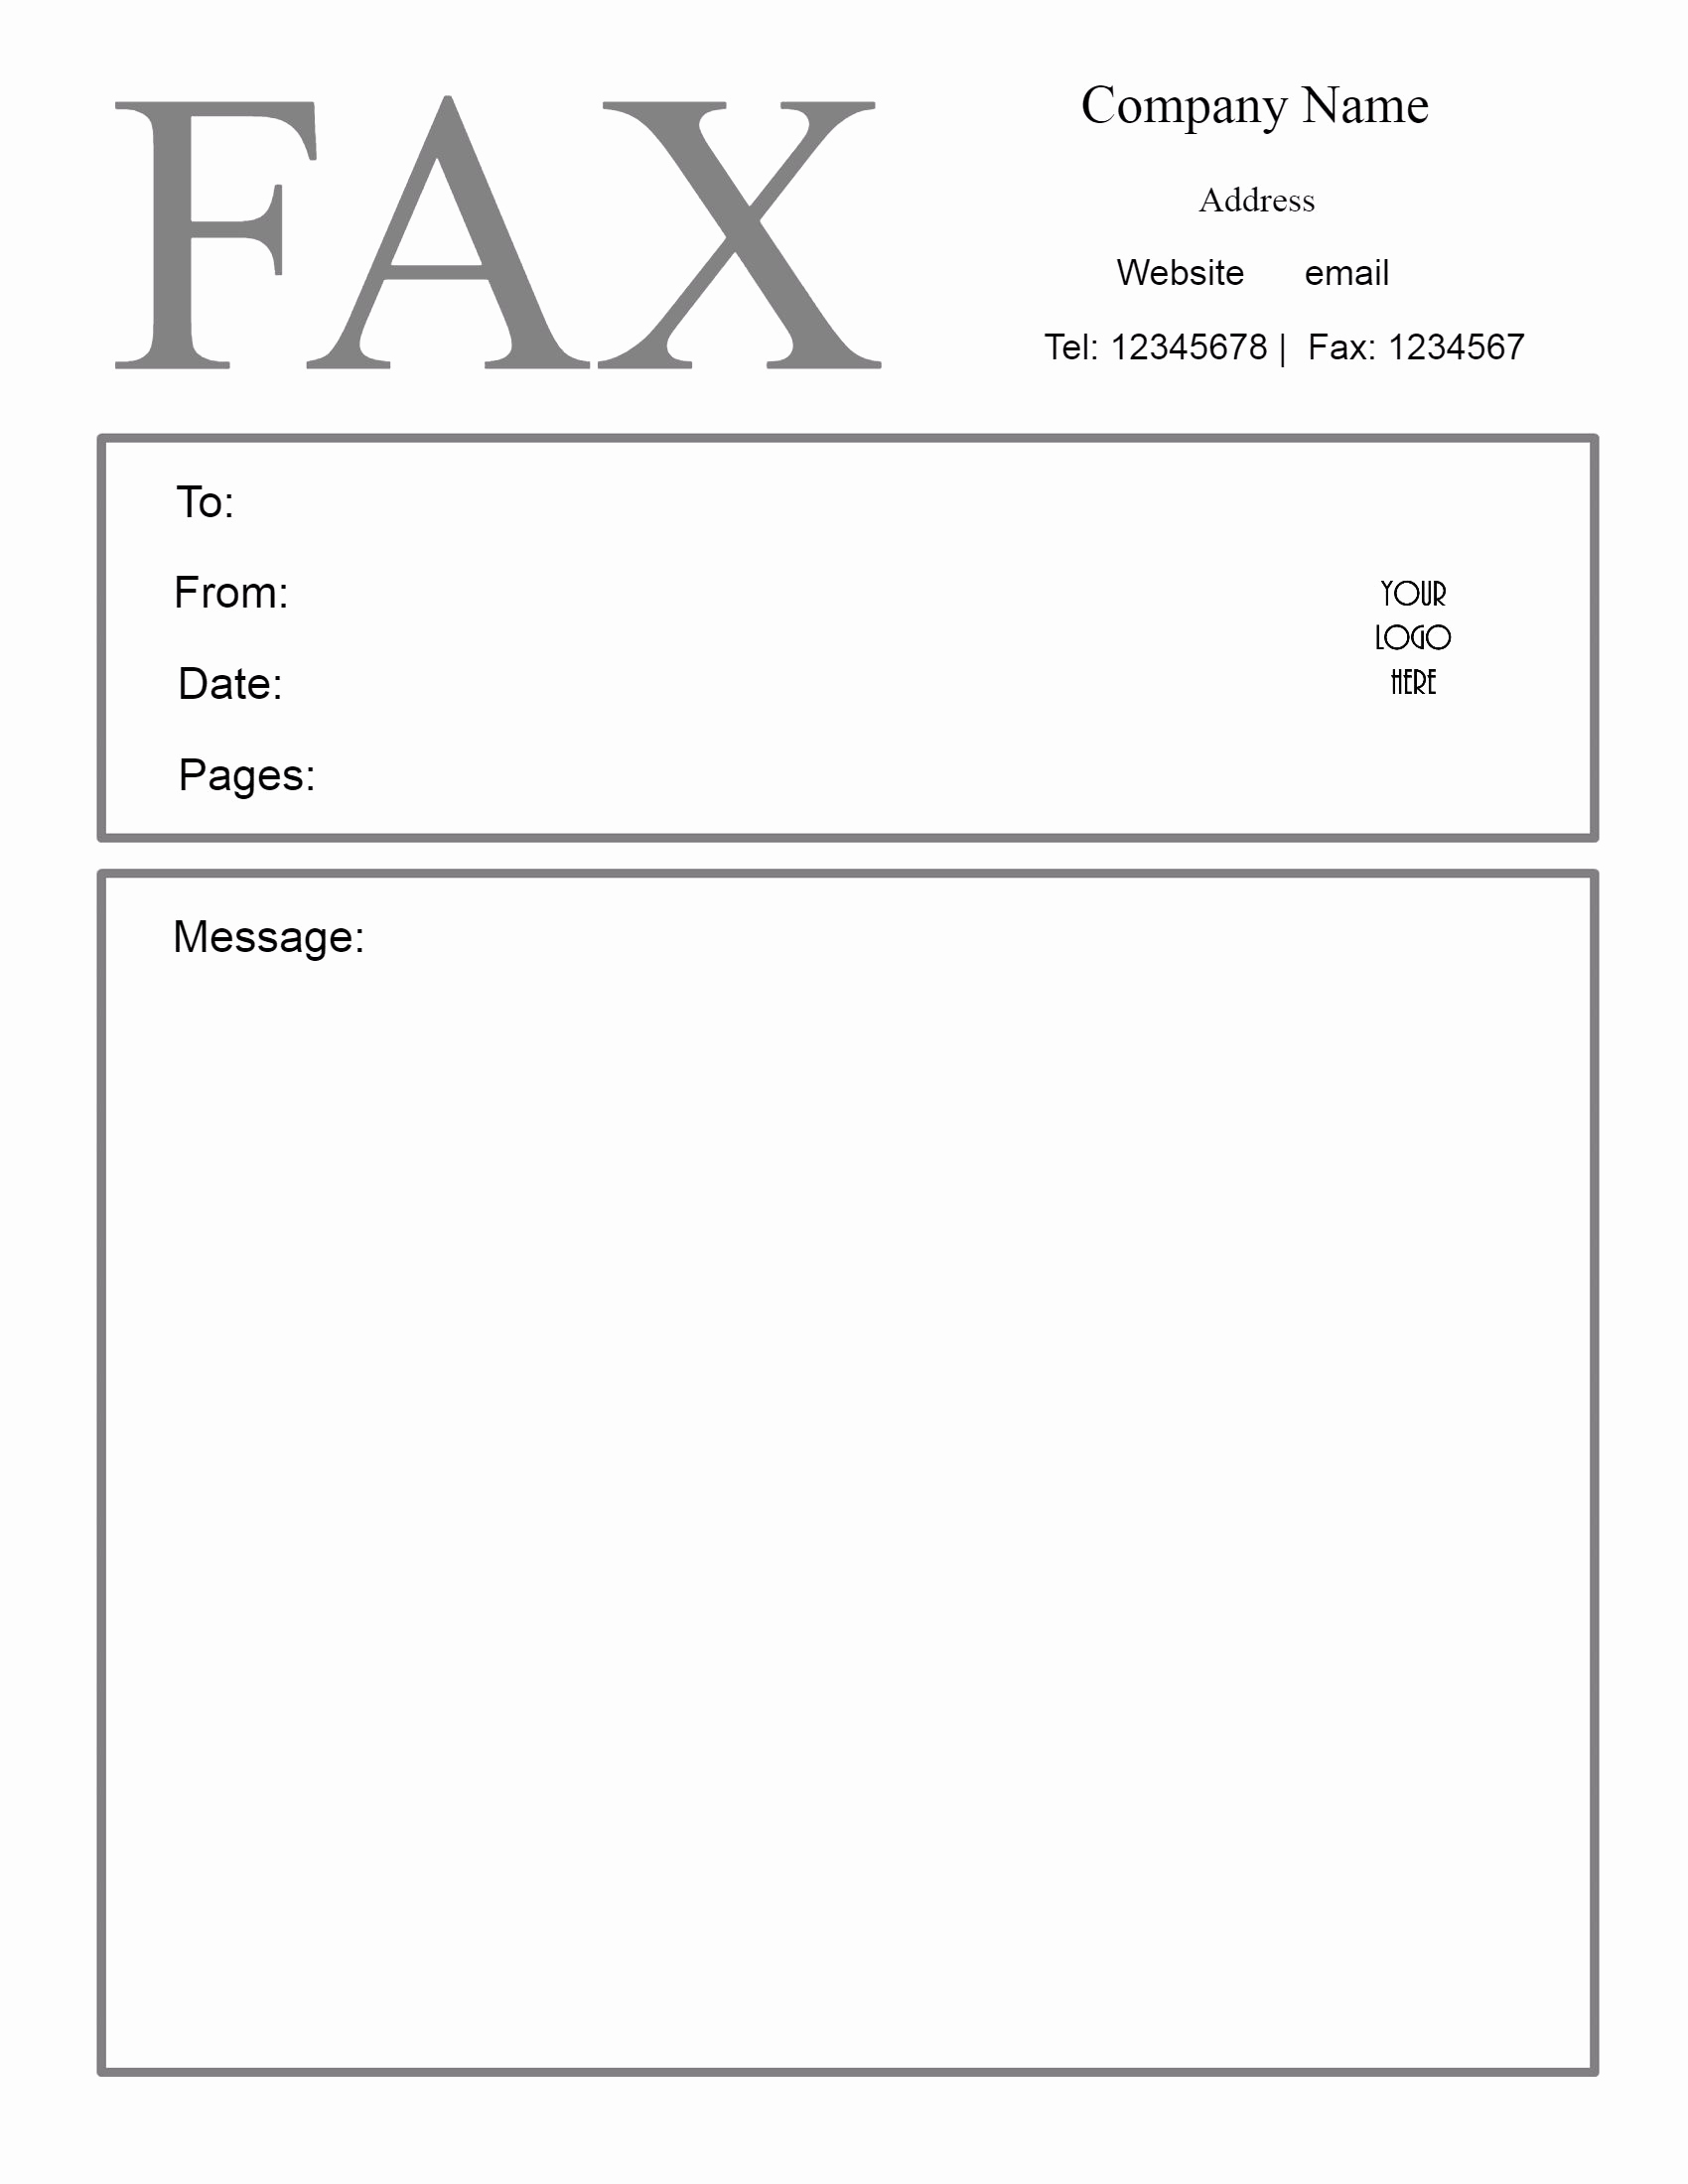 Fax Cover Page Template Luxury Free Fax Cover Sheet Template